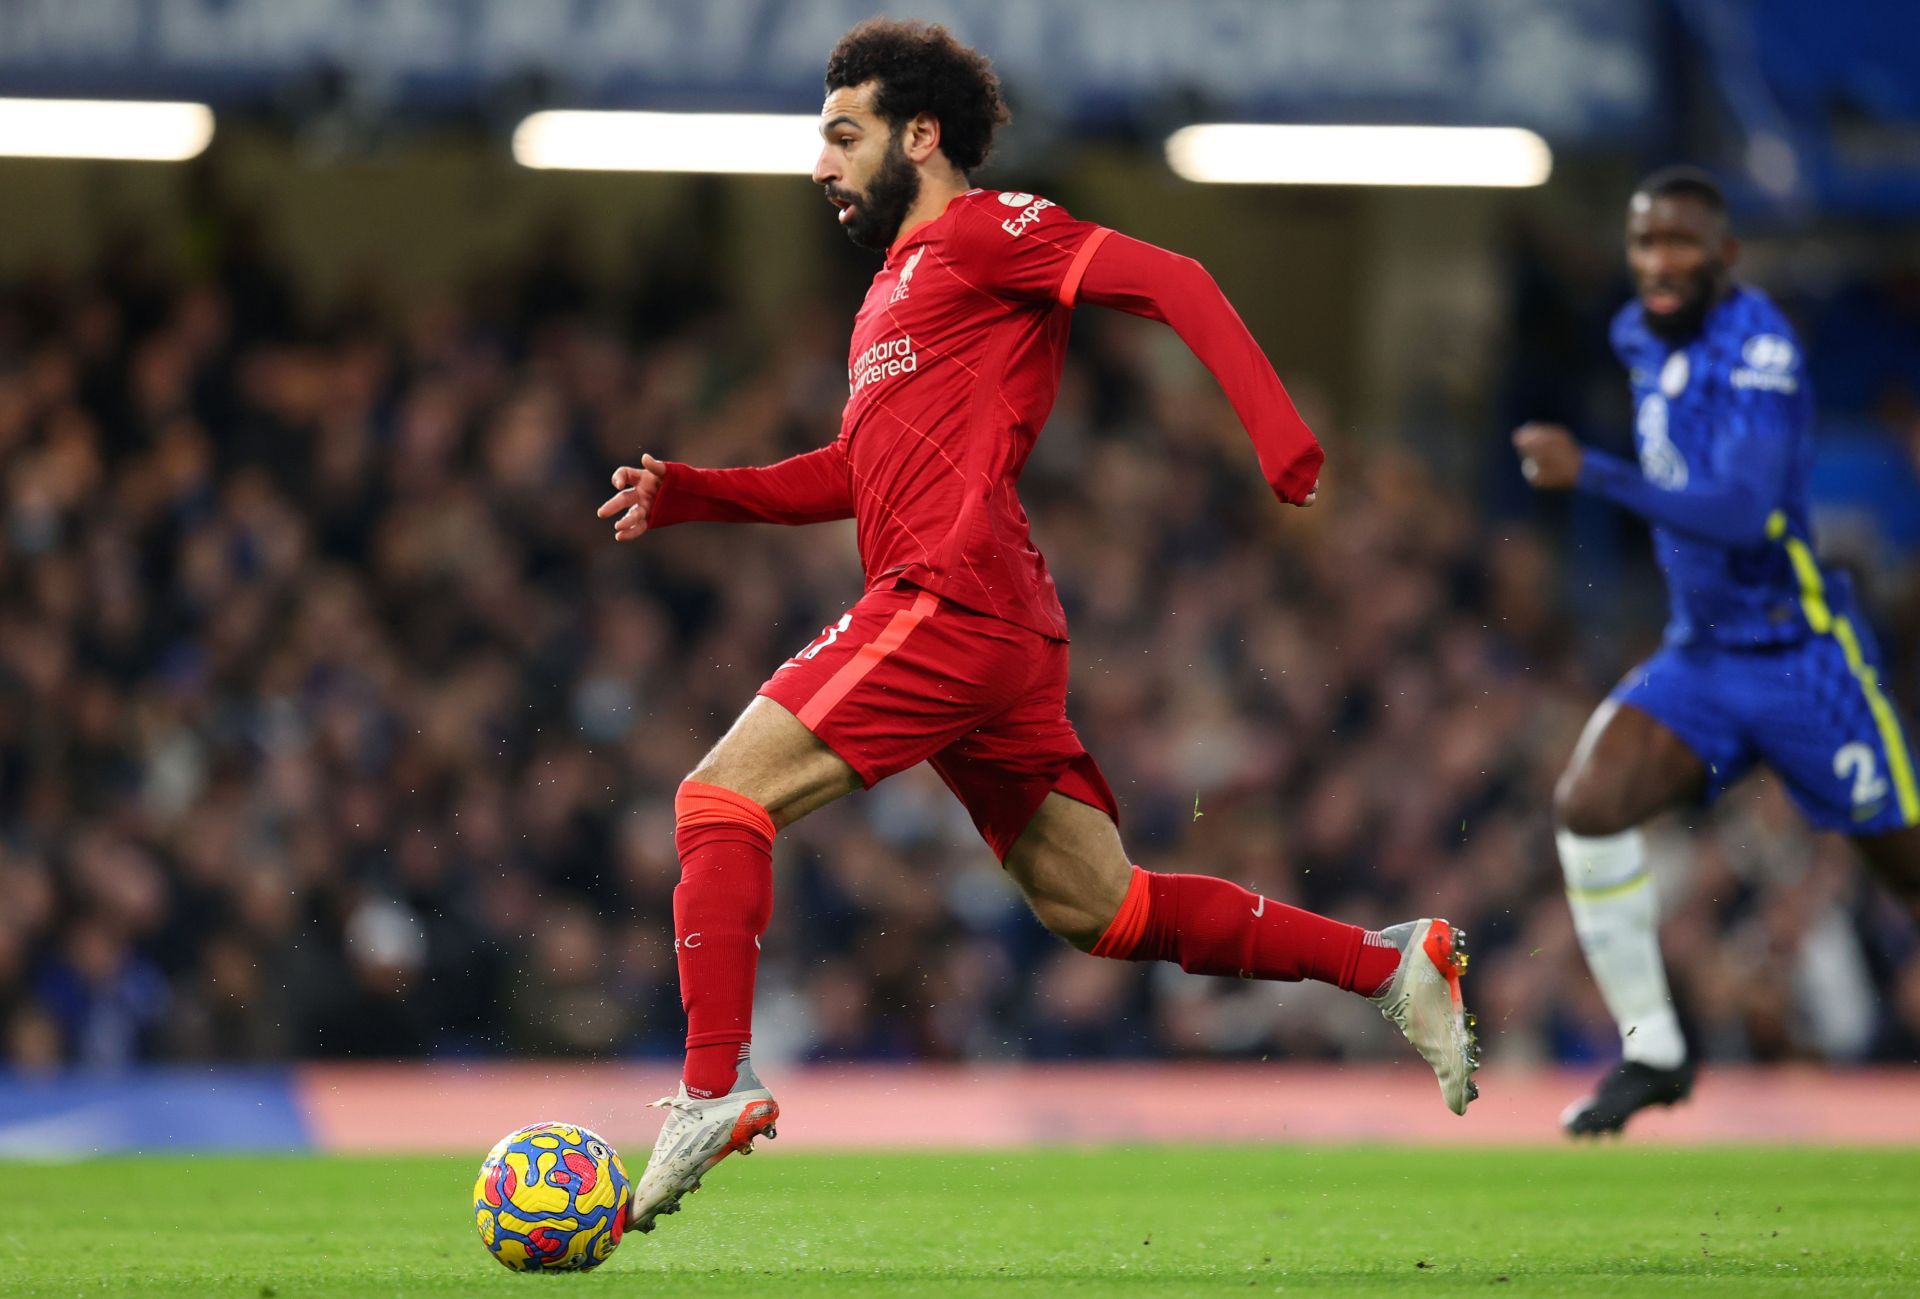 Salah has been in stunning form for Liverpool this season